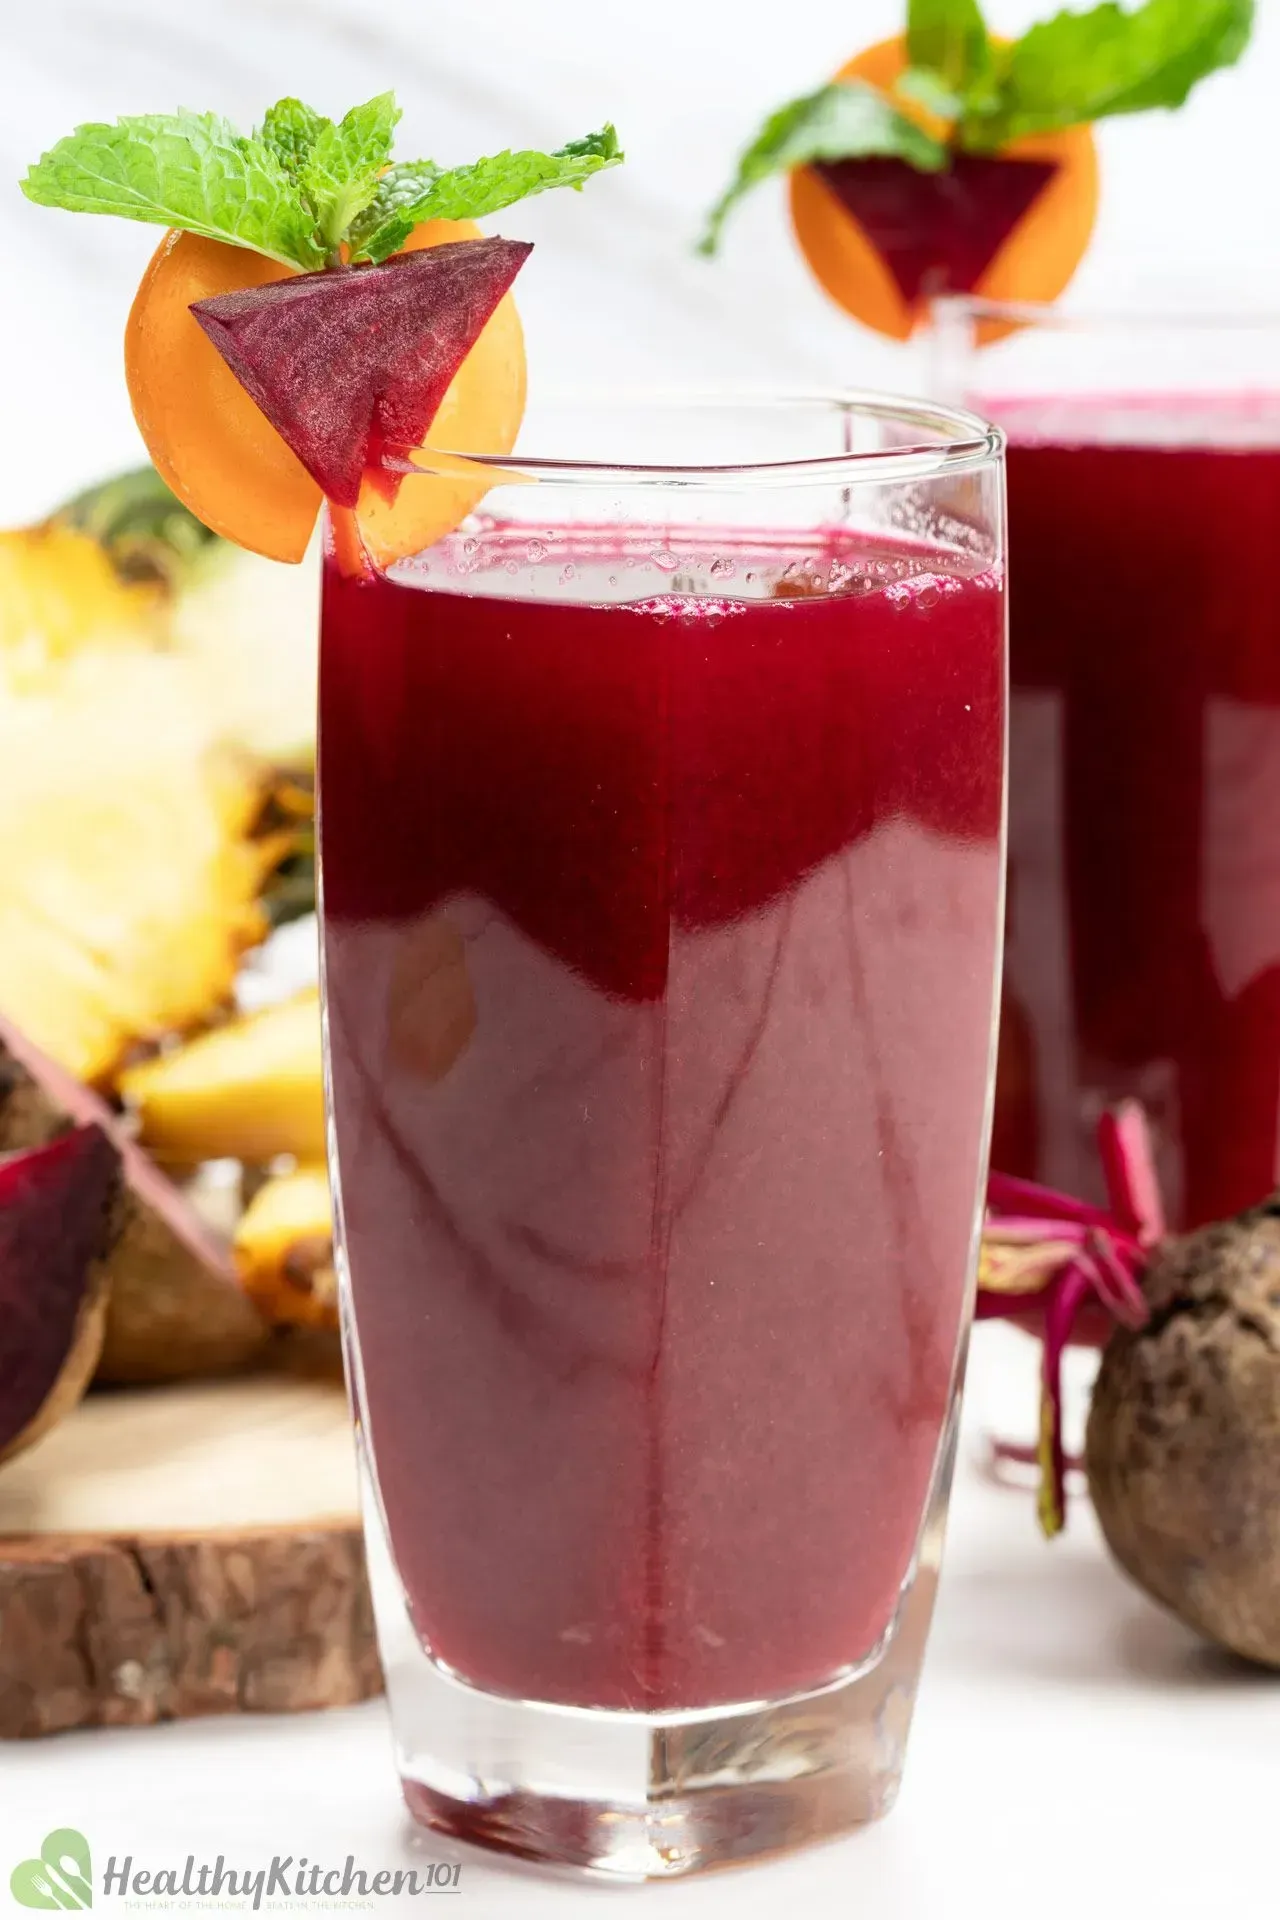 Carrot Beet Juice Recipe: A Healthy Beverage to Promote Heart Health